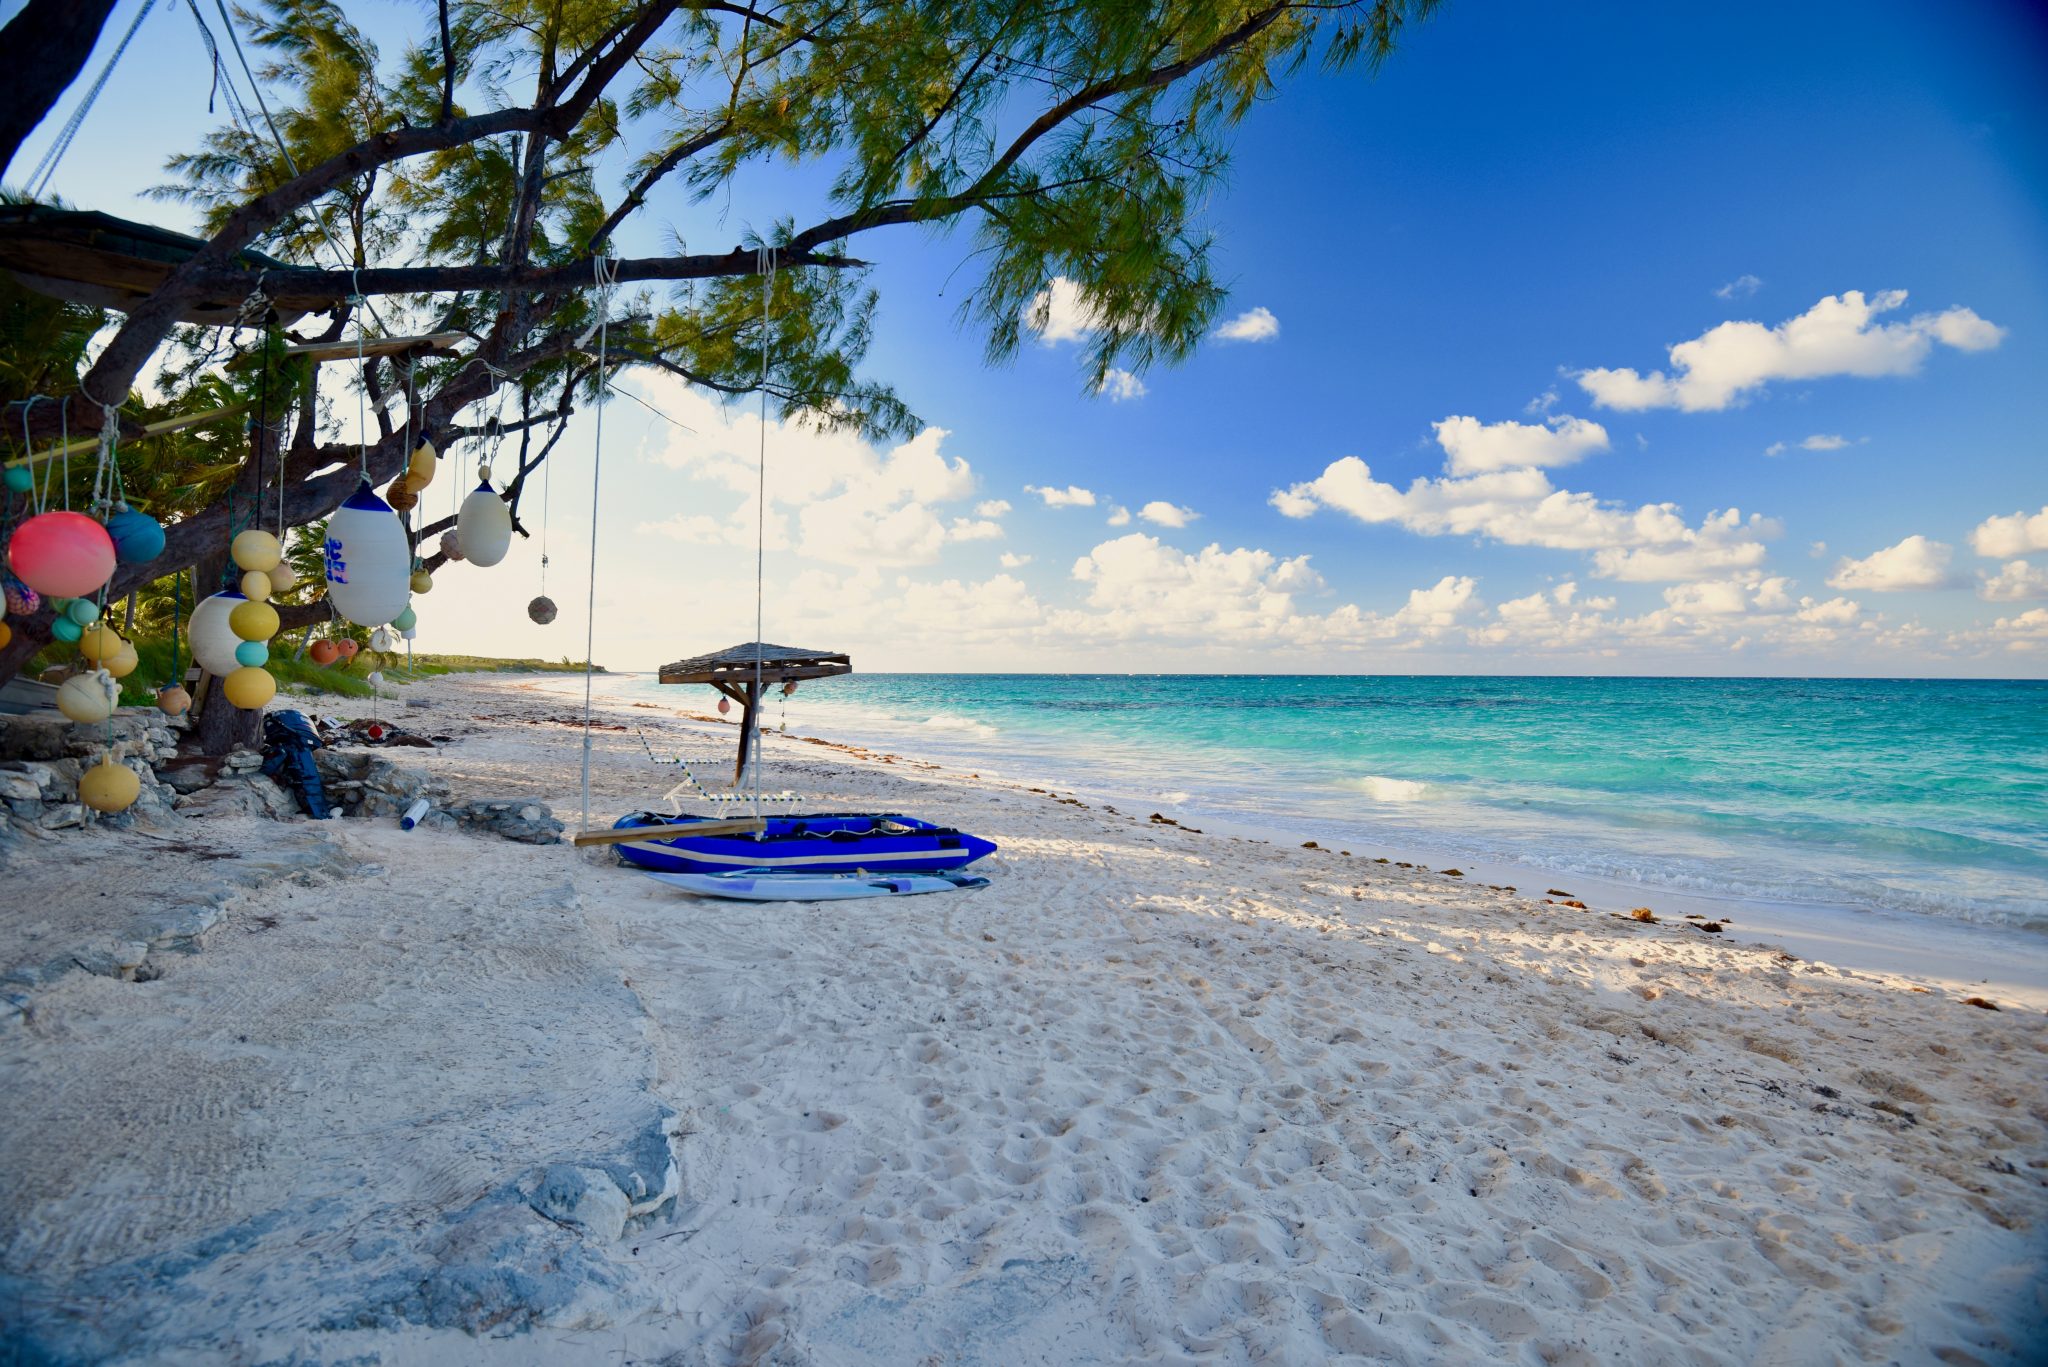 Kitesurfing in Cat Island Holidays and Travel Guides » Caribbean